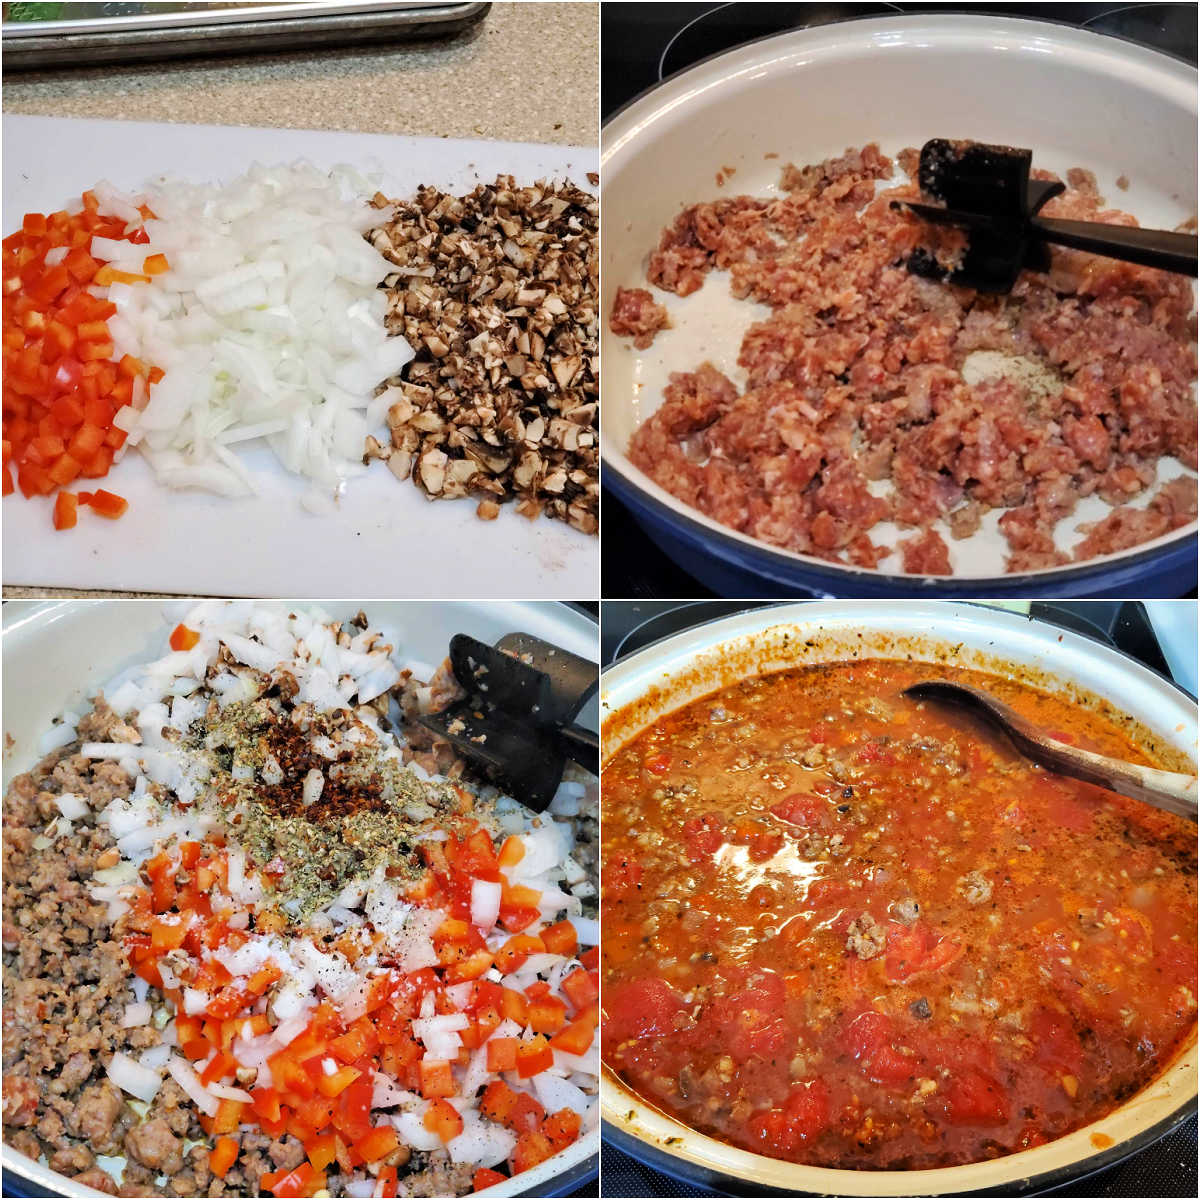 A collage of four images showing chopped red pepper, onions, and mushrooms, bulk sausage being cooked in a pan, adding the chopped vegetables and spices to the pan, and the sauce with tomatoes in it simmering on the stove.